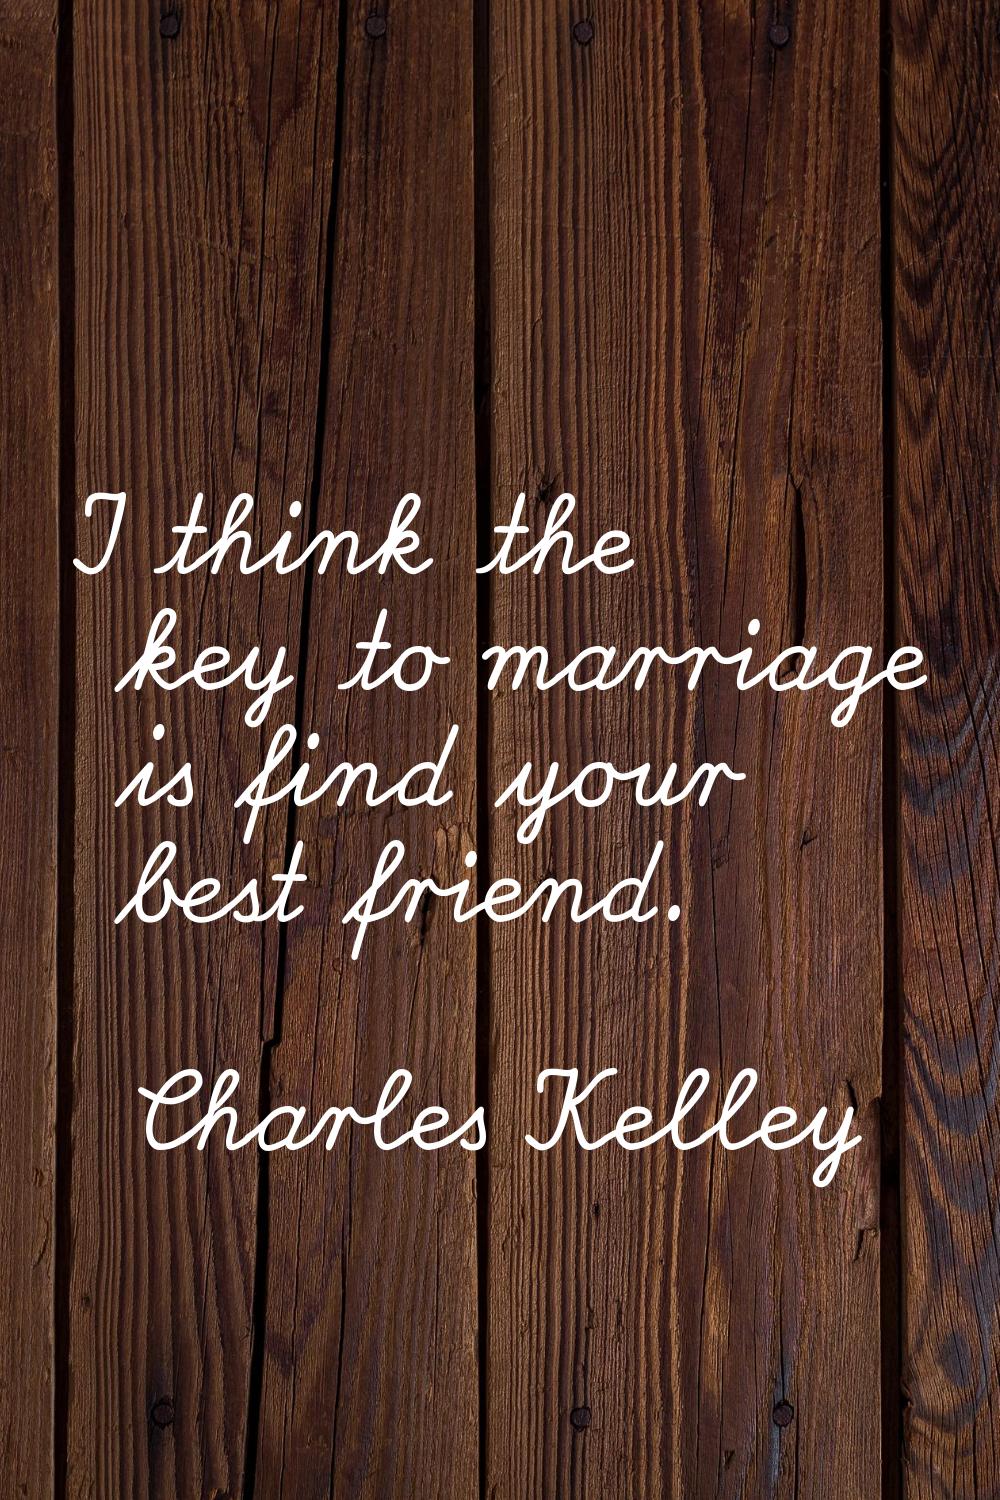 I think the key to marriage is find your best friend.